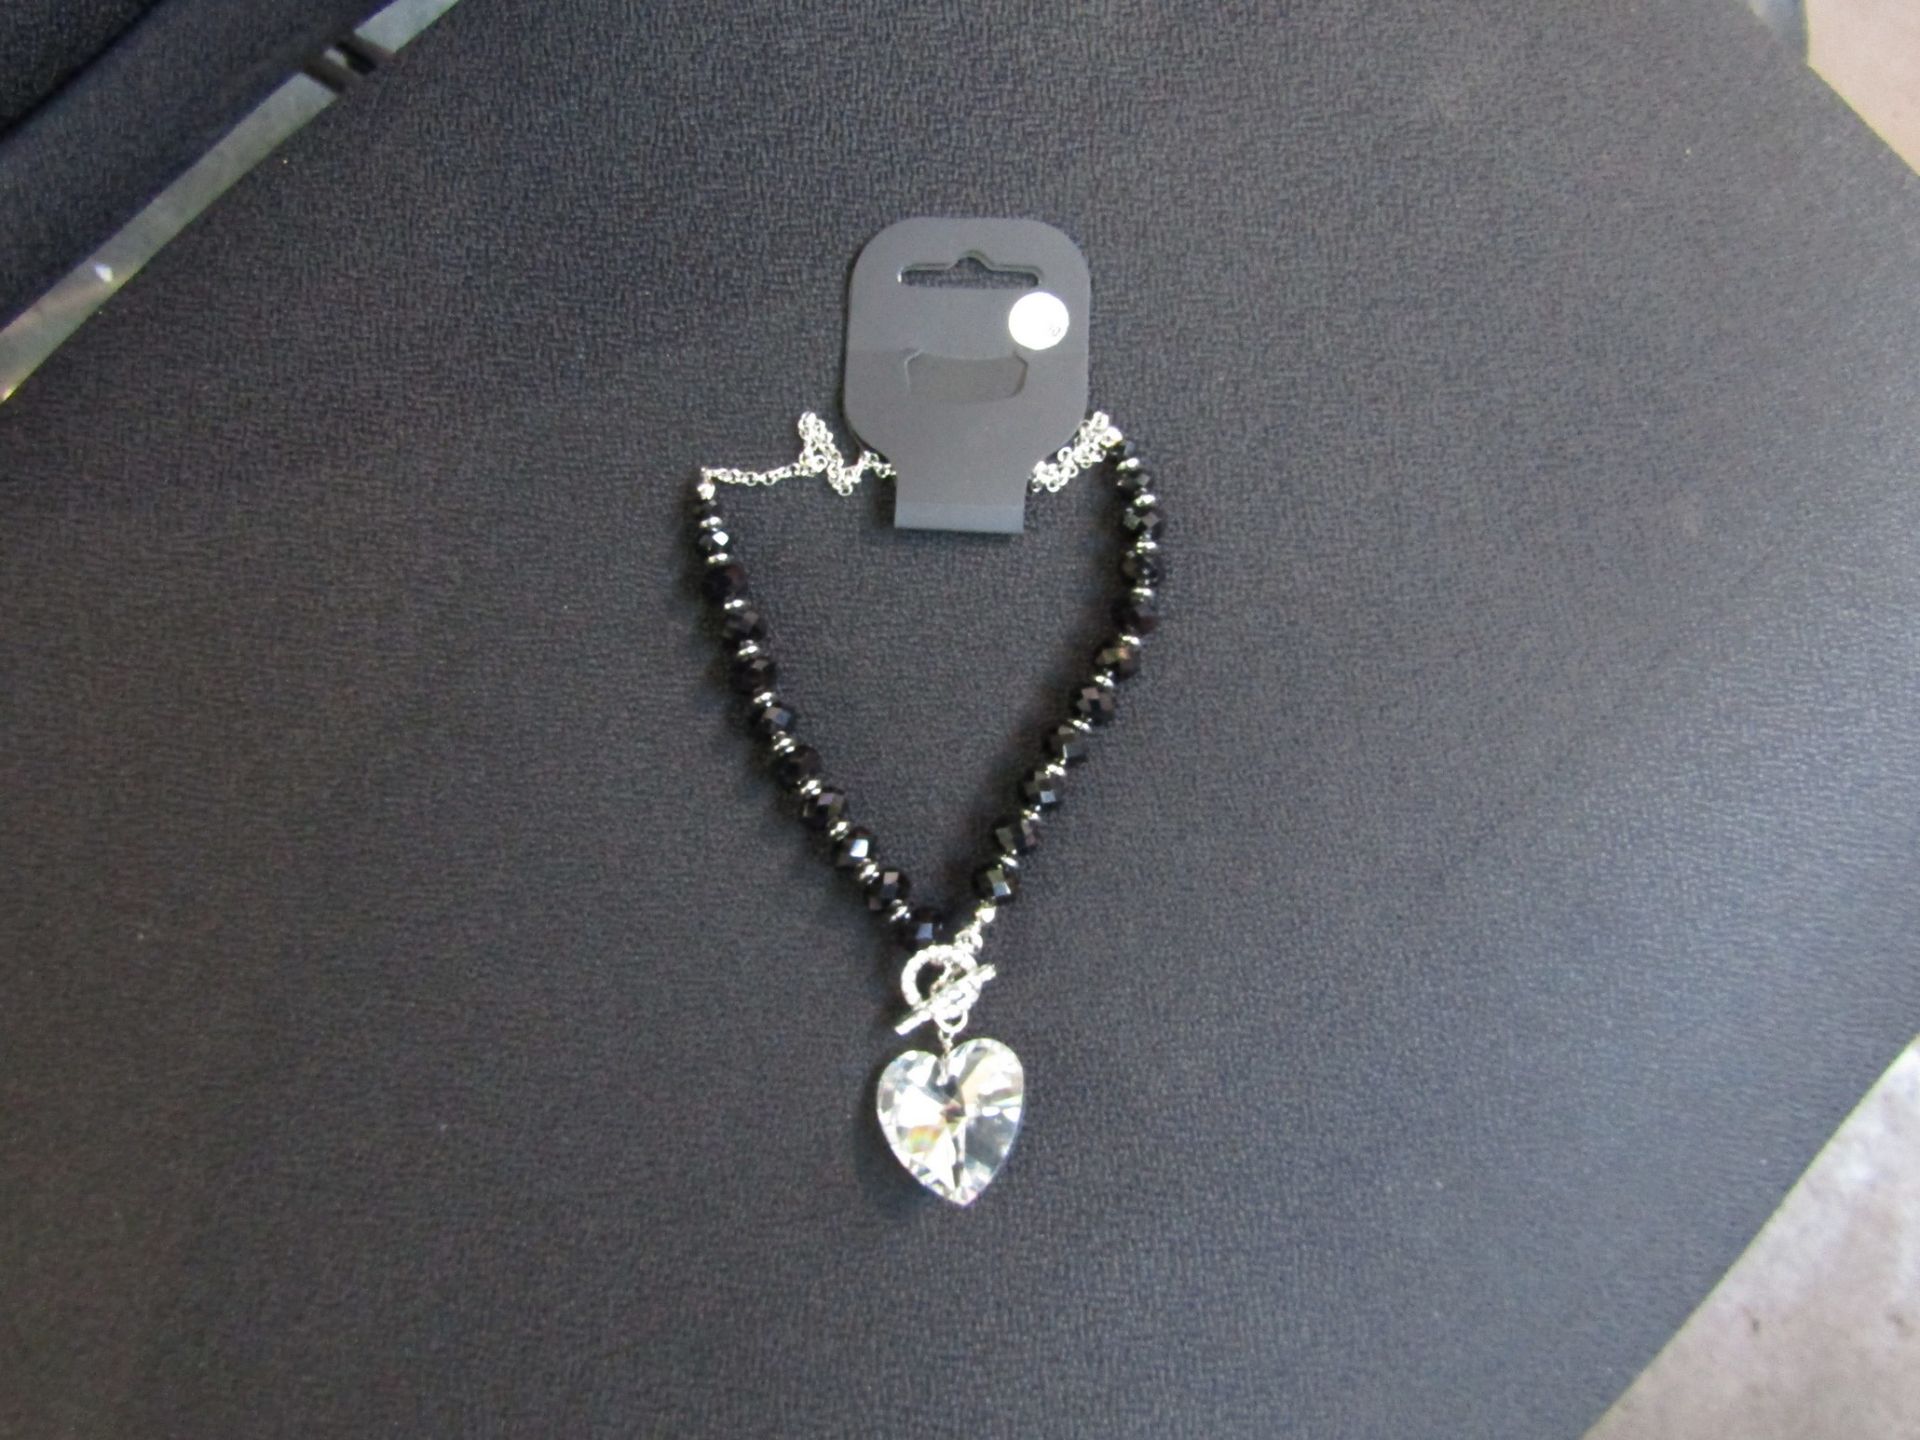 1 BRAND NEW FACETED STONE HEART PENDANT NECKLACE W